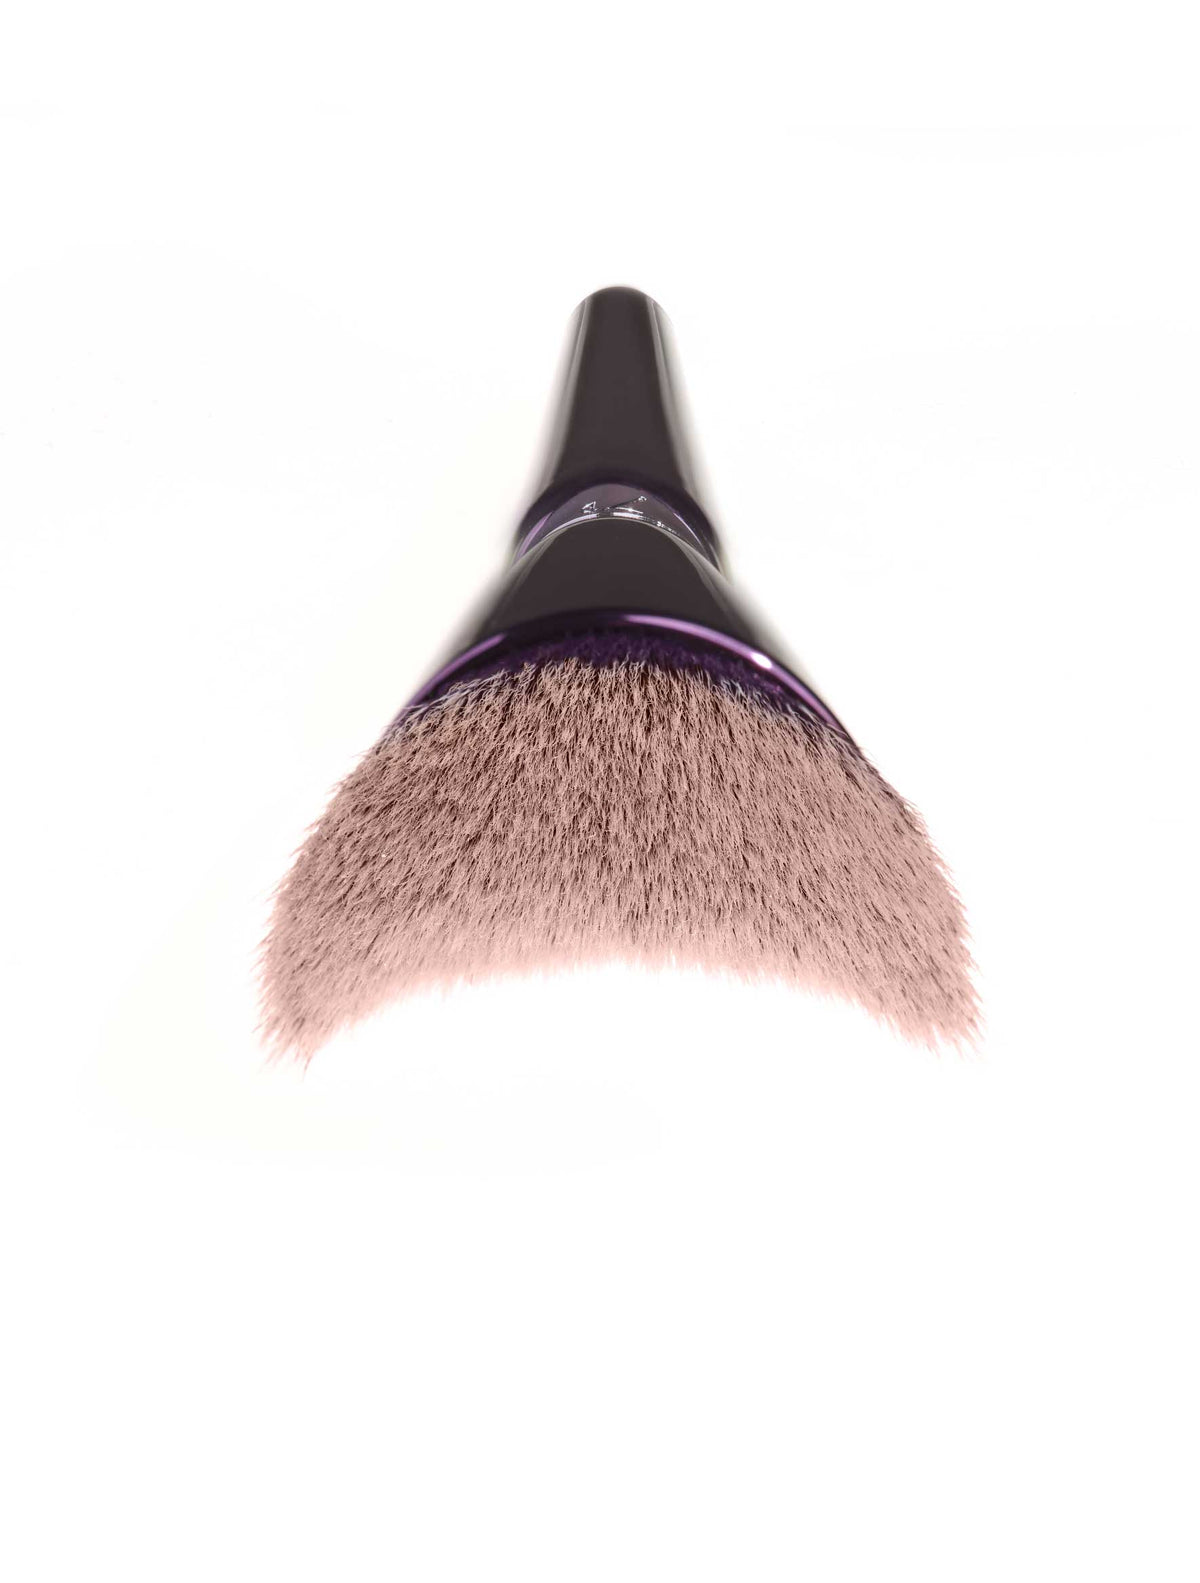 Fast Flawless Application Oval Foundation Brush Perfect For - Temu